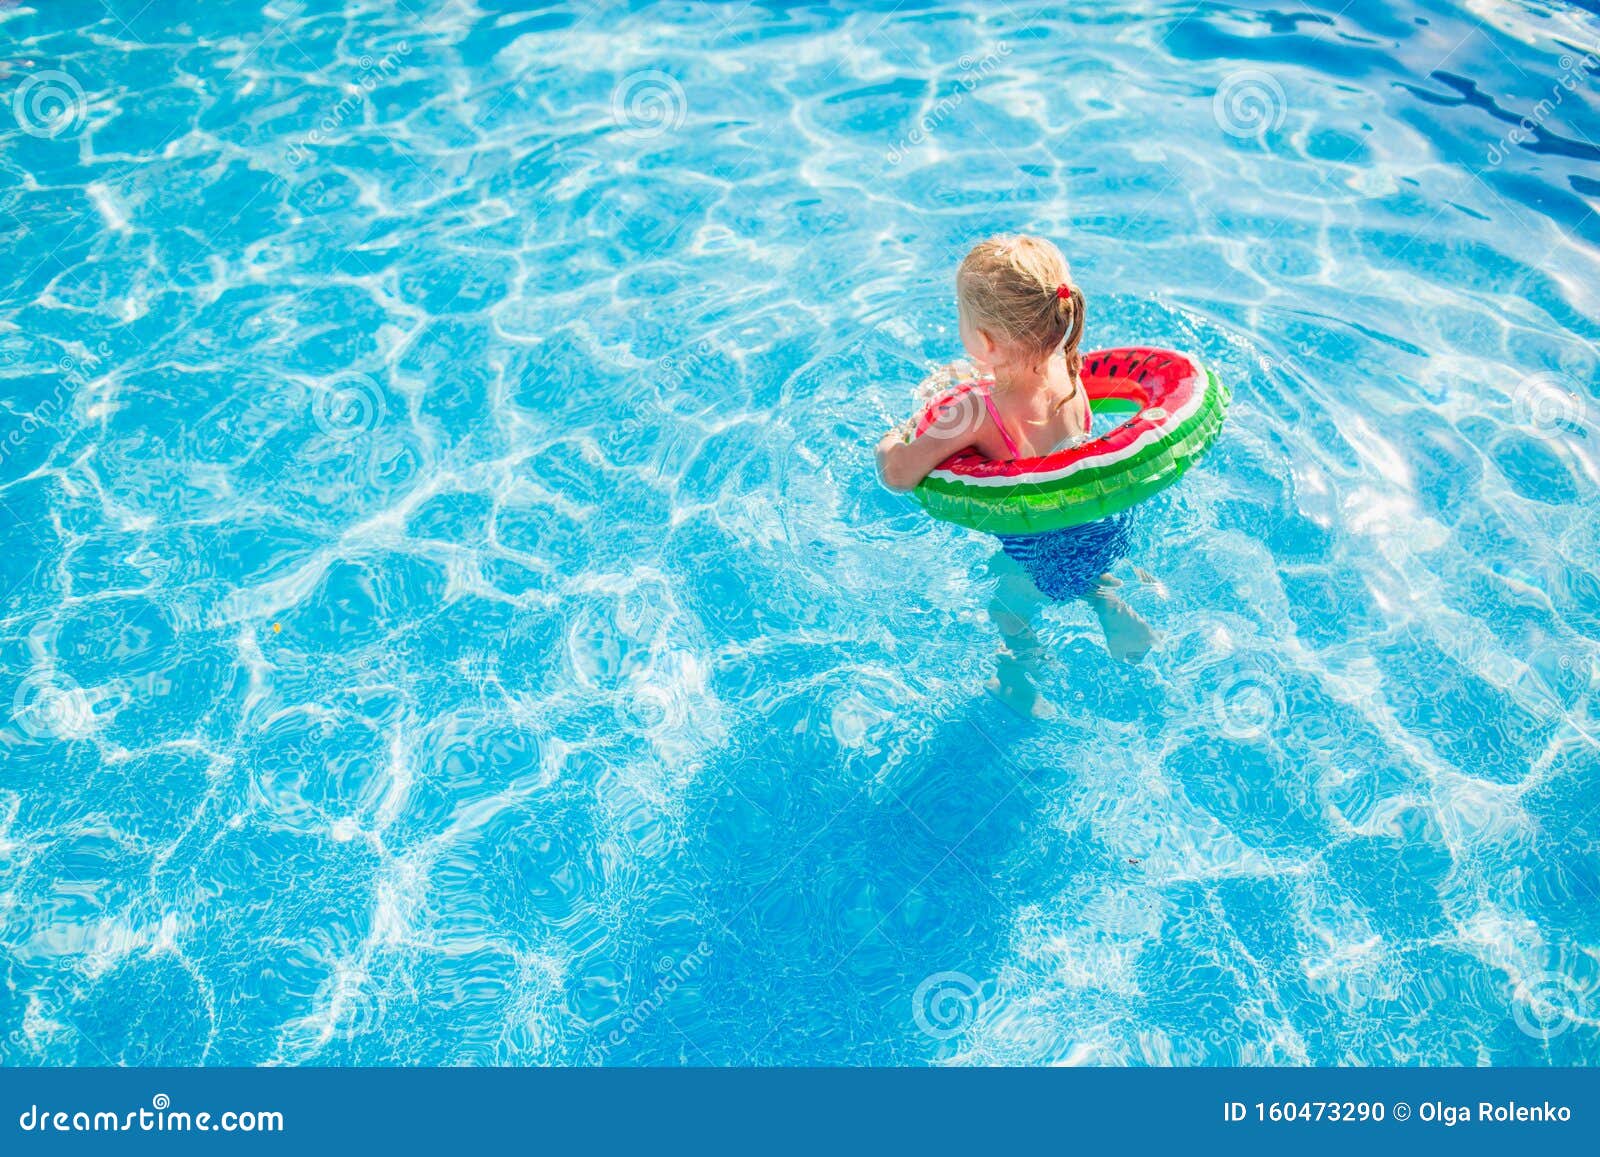 water toys for swimming pools